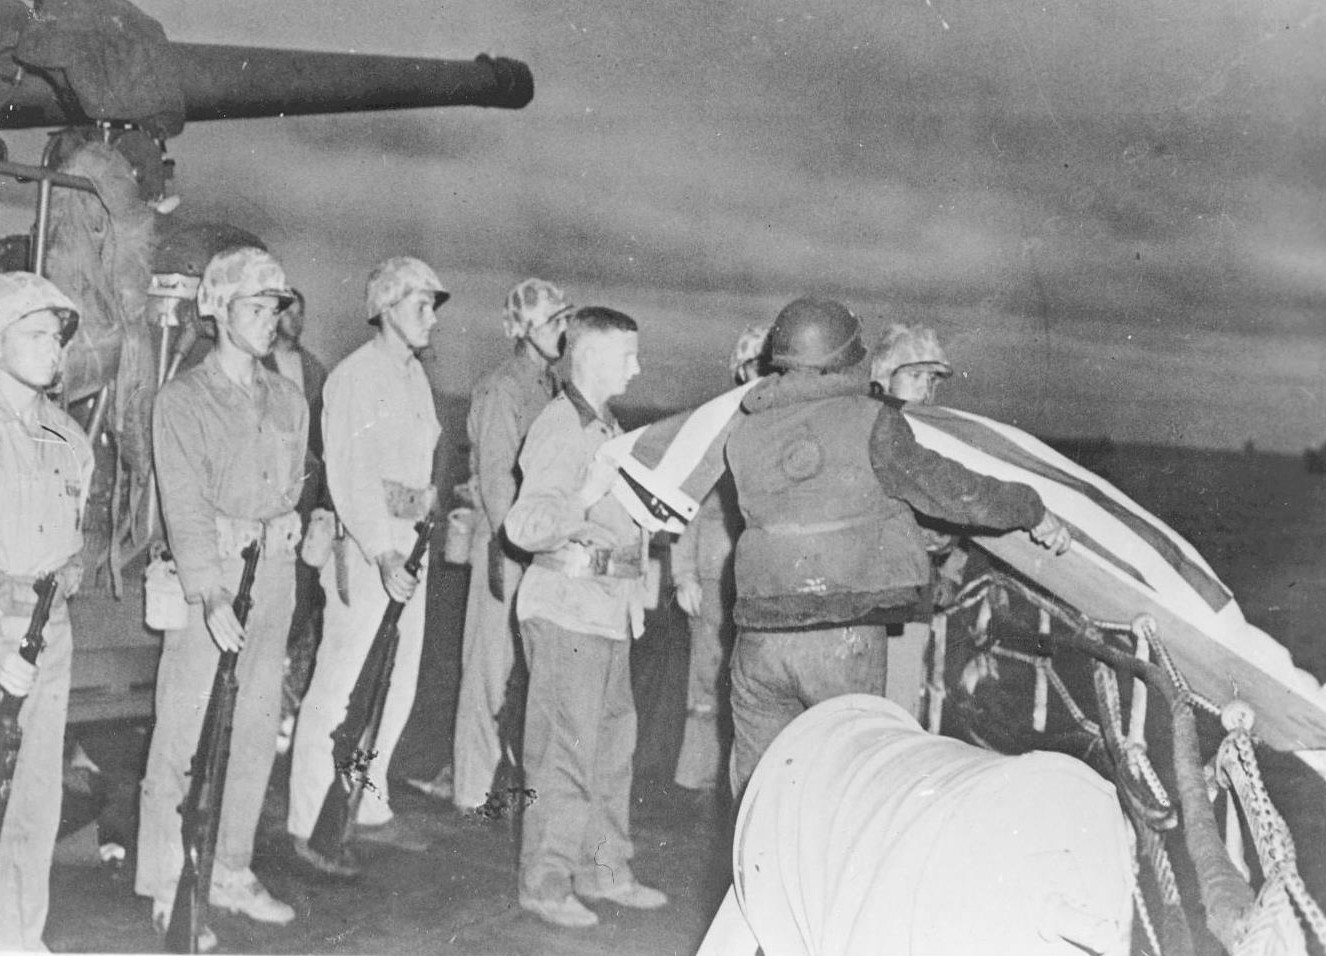 Burial at sea aboard a US Coast Guard ship with Marine Corps honor guard, in the Pacific Ocean off Iwo Jima, Japan, Feb 1945